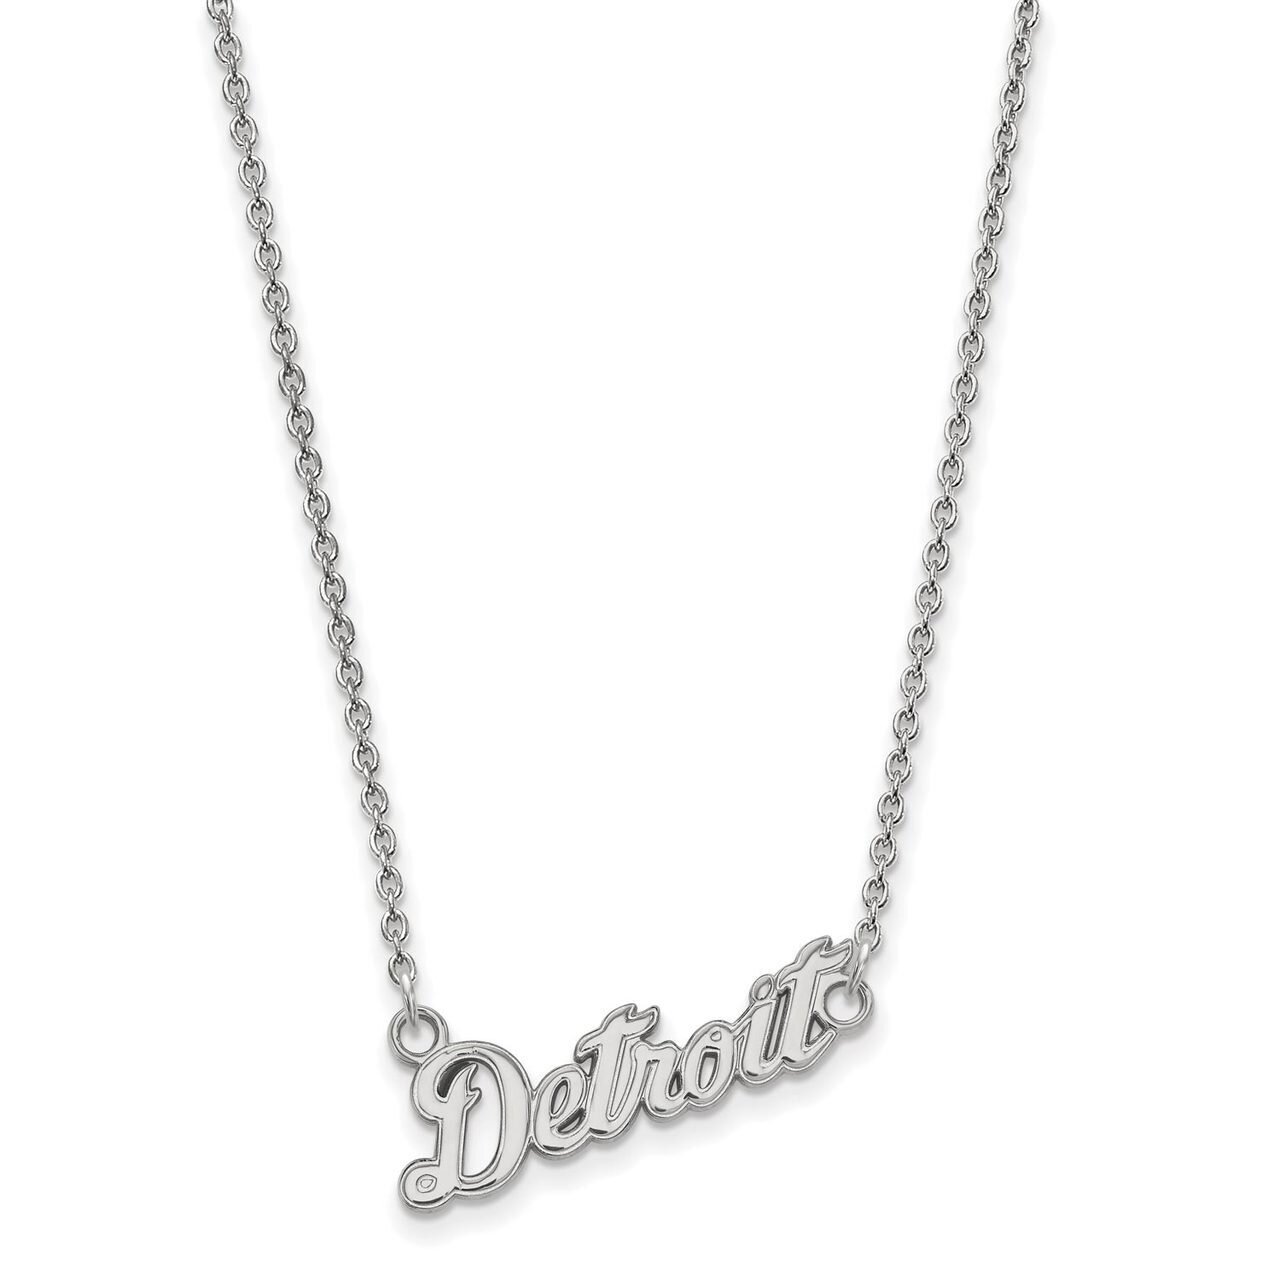 Detroit Tigers Small Pendant with Chain Necklace 10k White Gold 1W061TIG-18